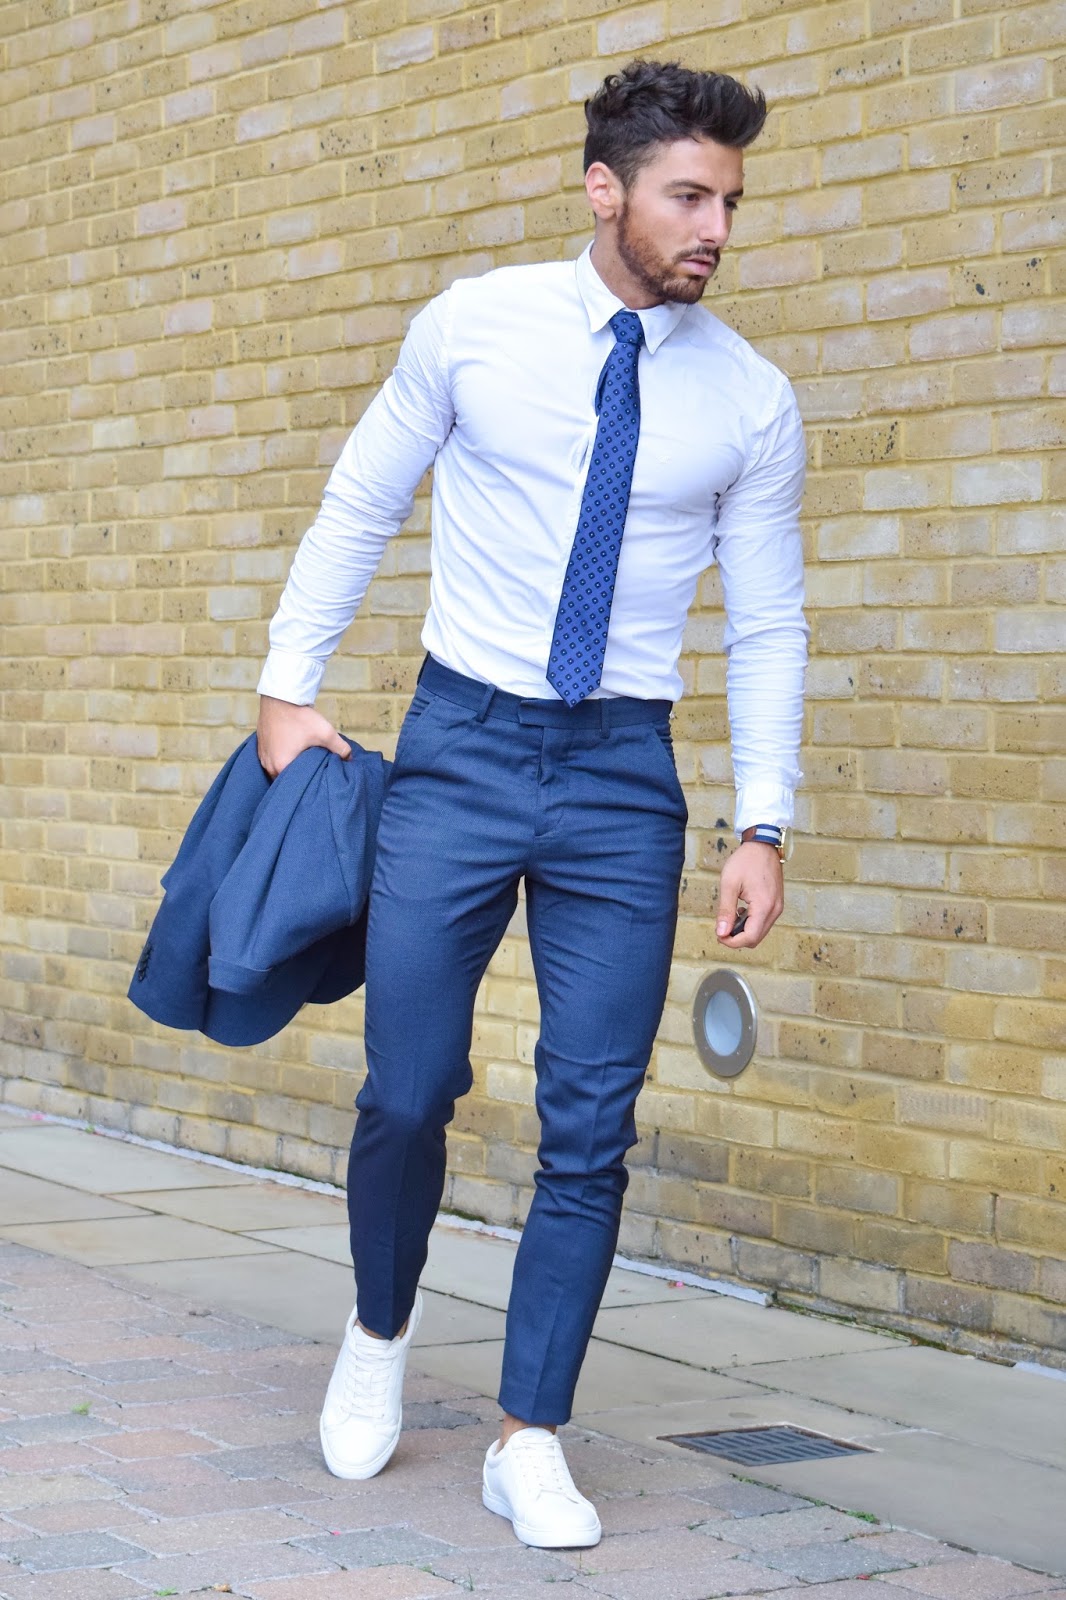 Top 30 Best Graduation Outfits for Guys | Graduation Outfits for Guys